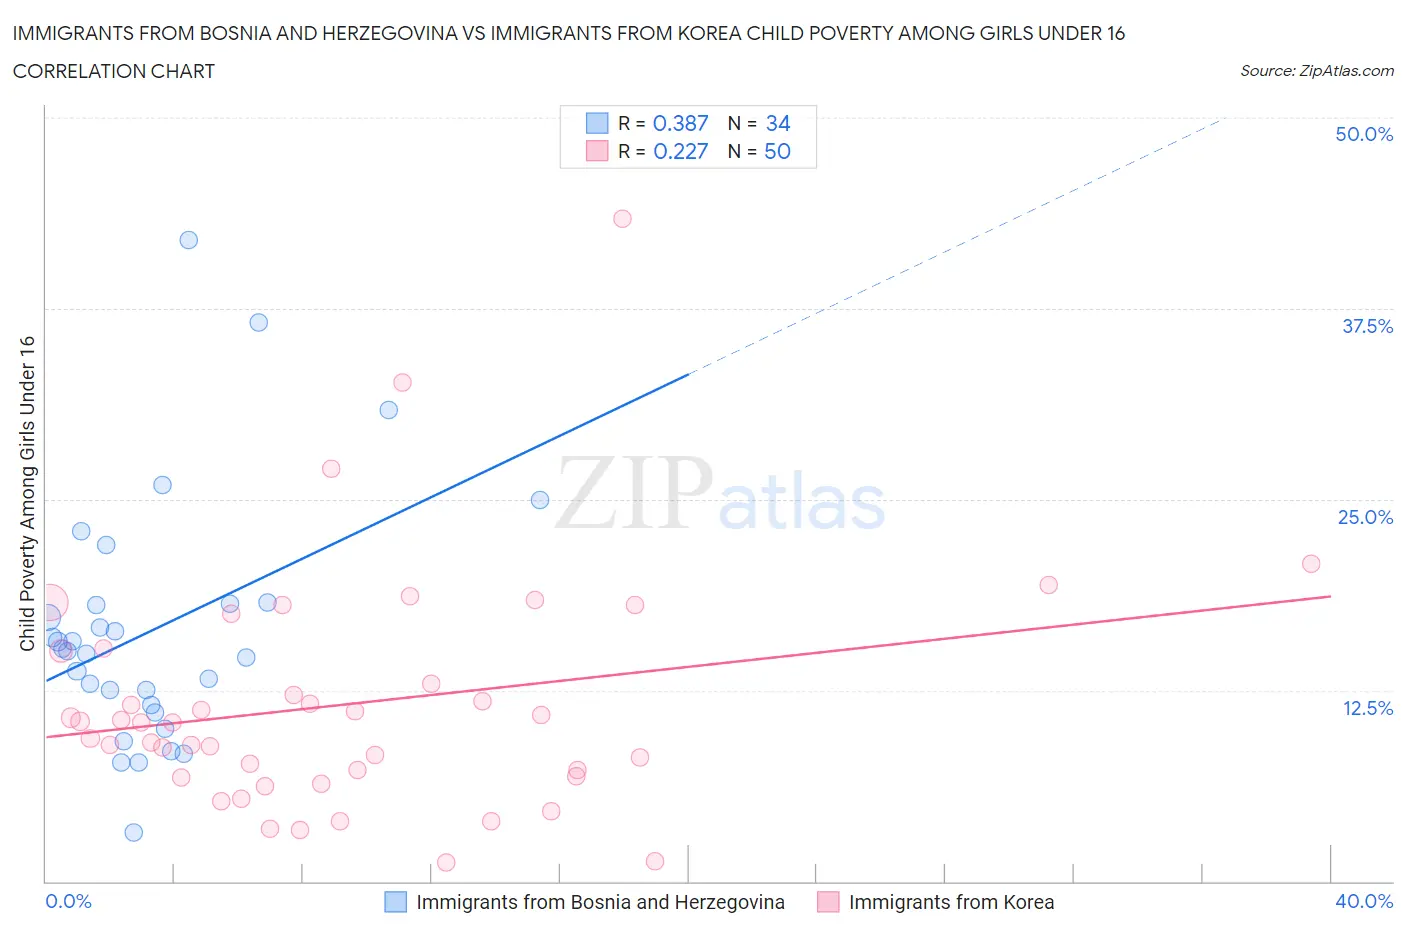 Immigrants from Bosnia and Herzegovina vs Immigrants from Korea Child Poverty Among Girls Under 16